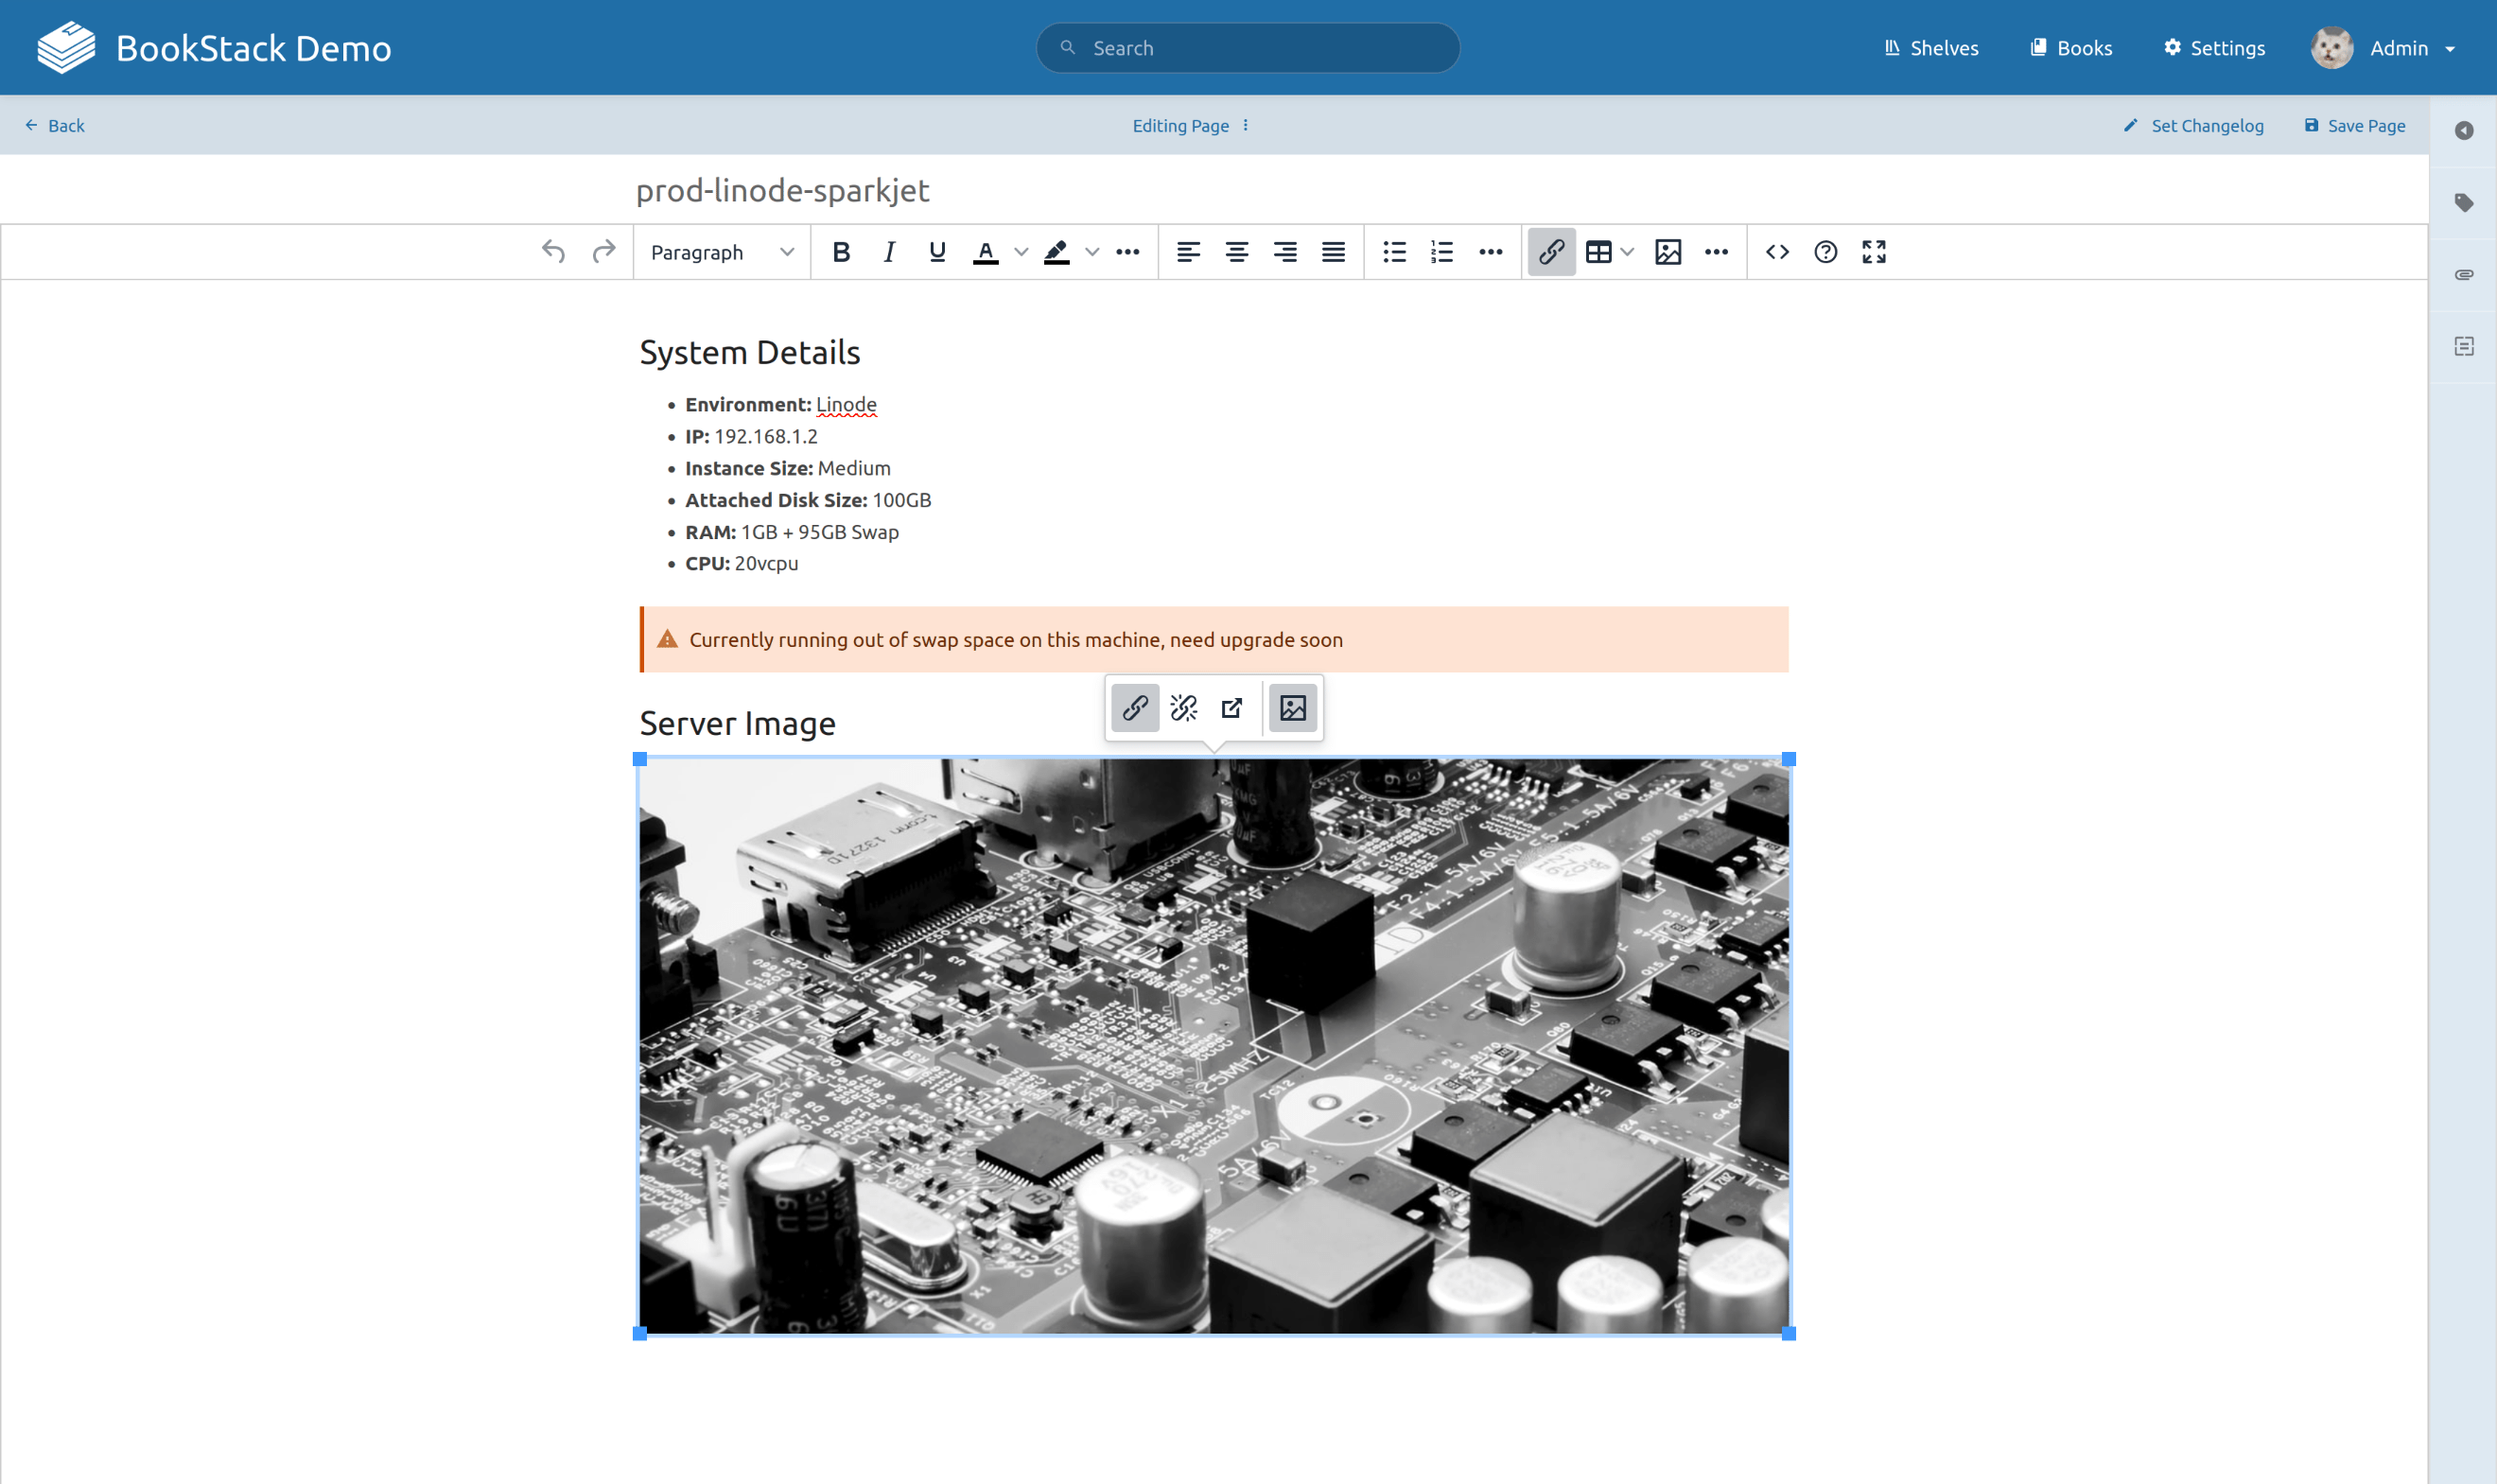 An image of editing a "Page" using the WYSIWYG editor.